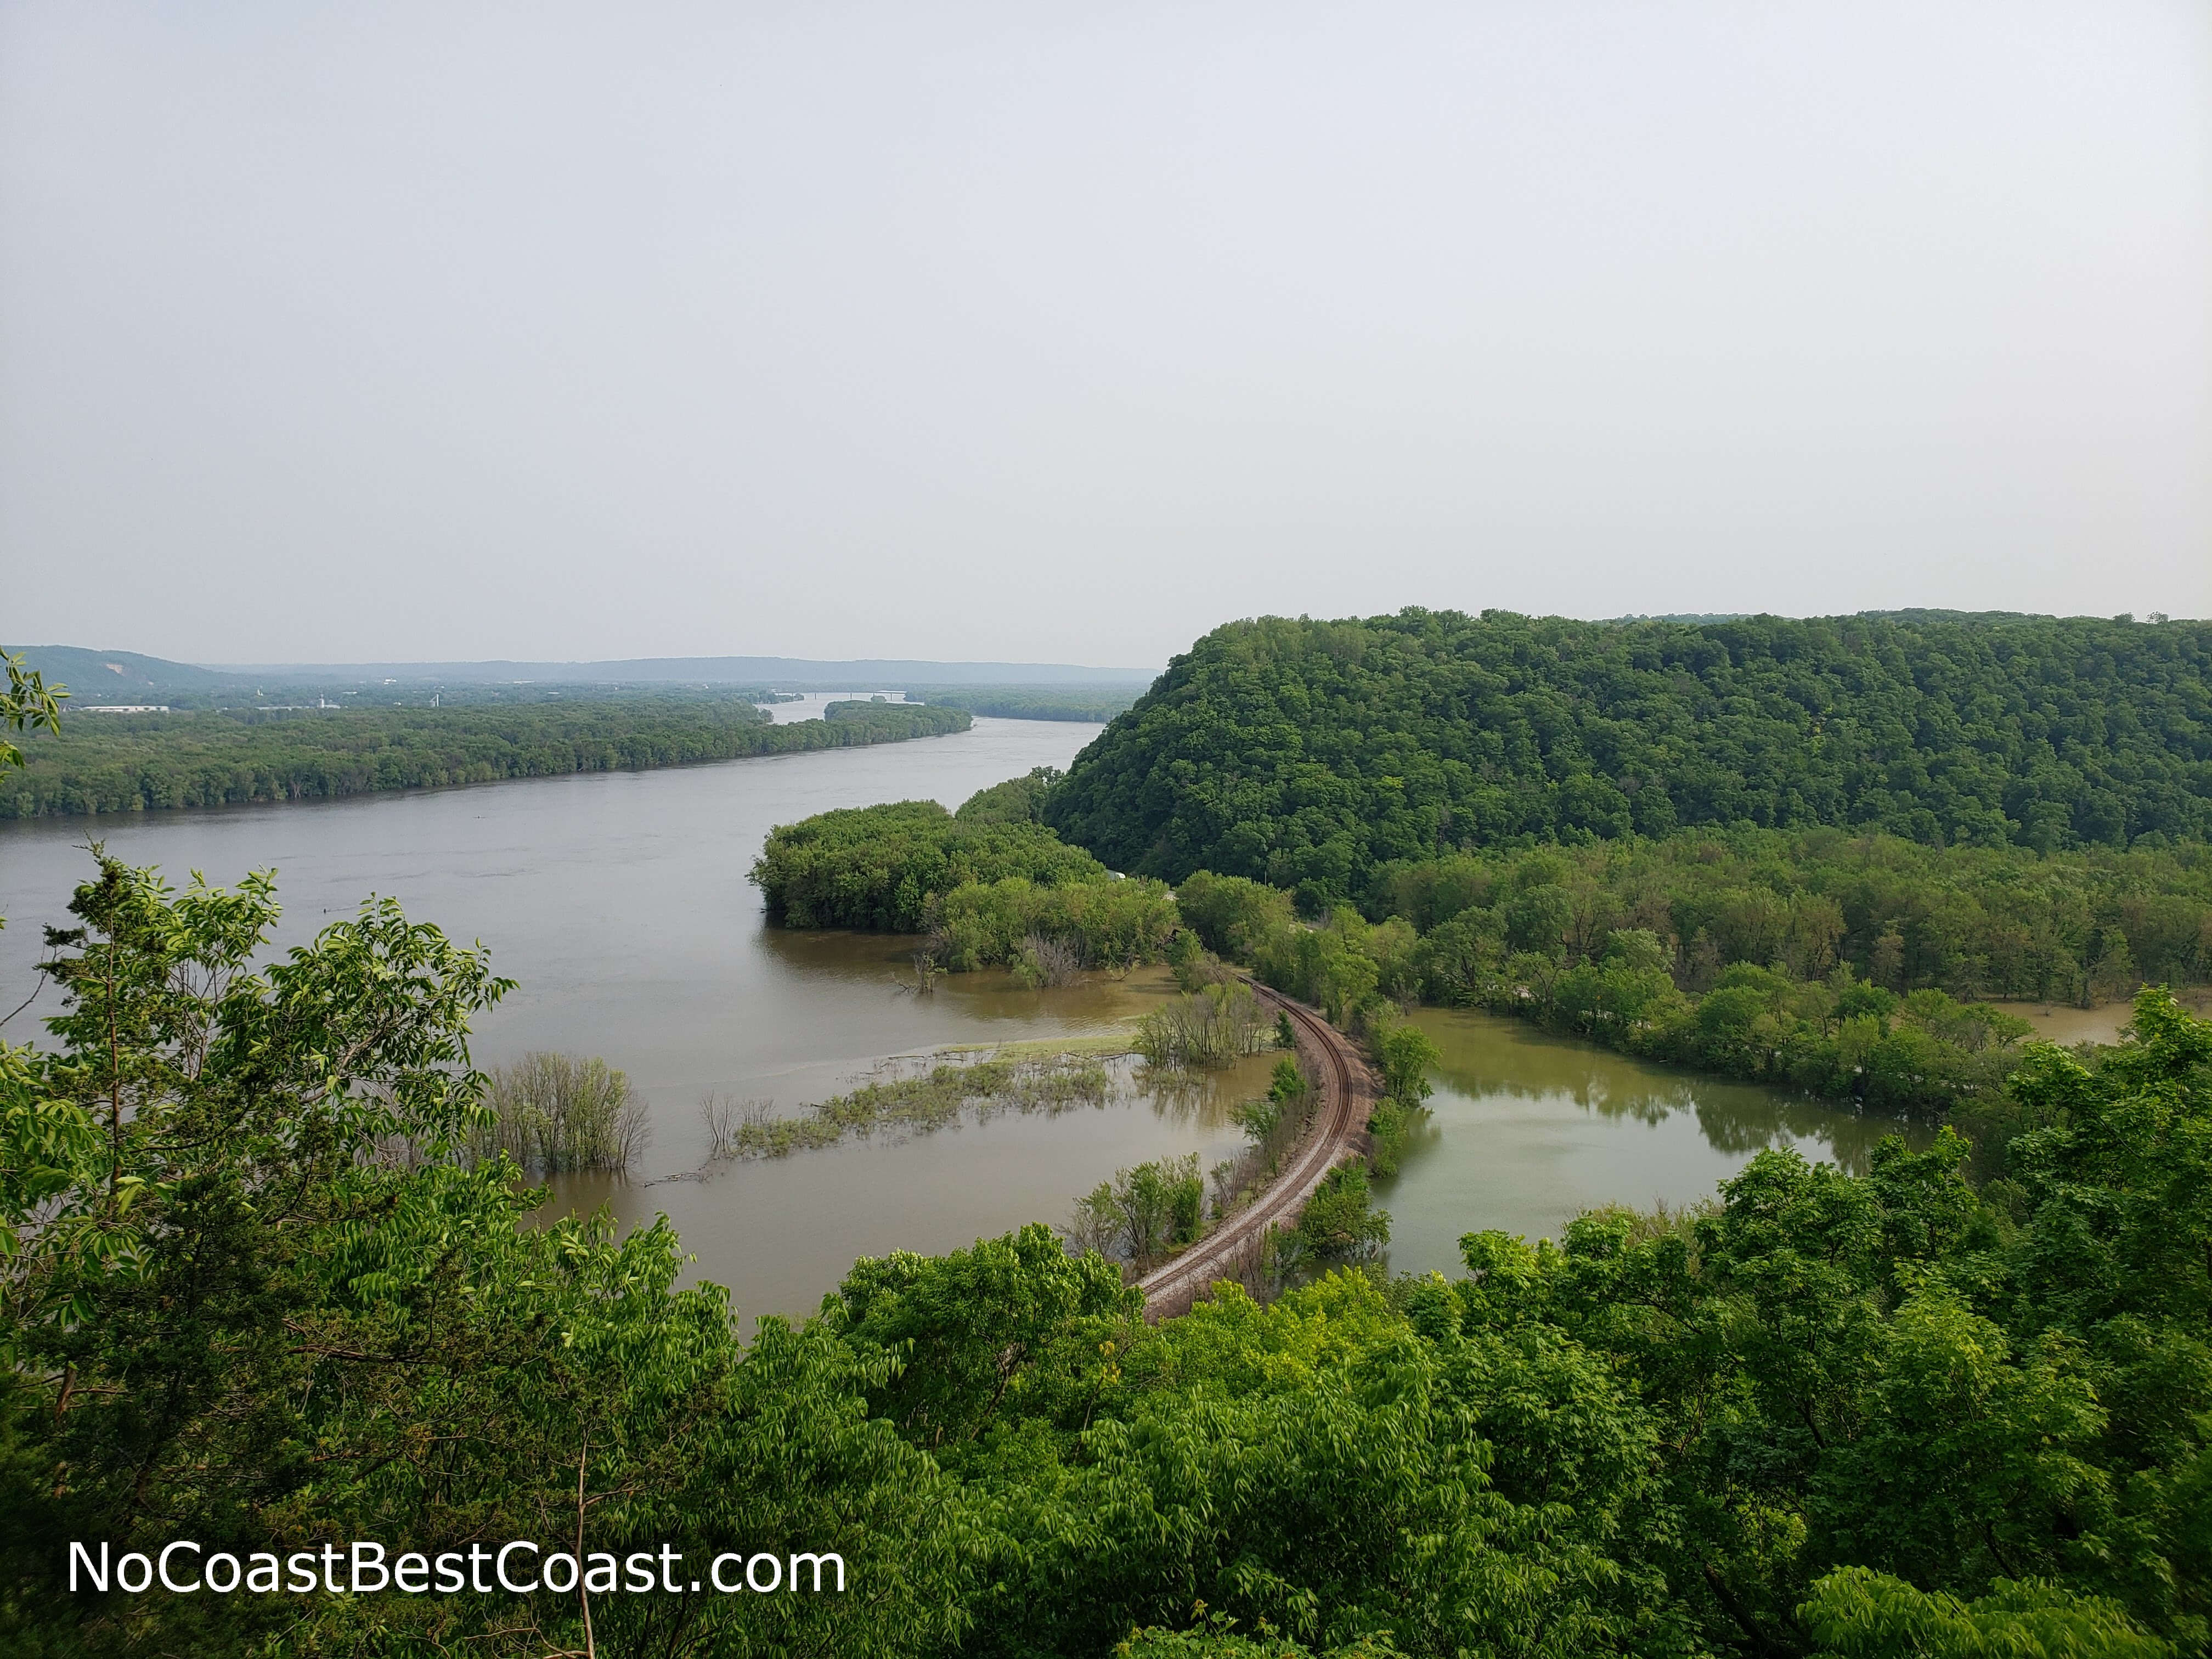 The famous view of the Mississippi River Bluffs from Eagle Rock